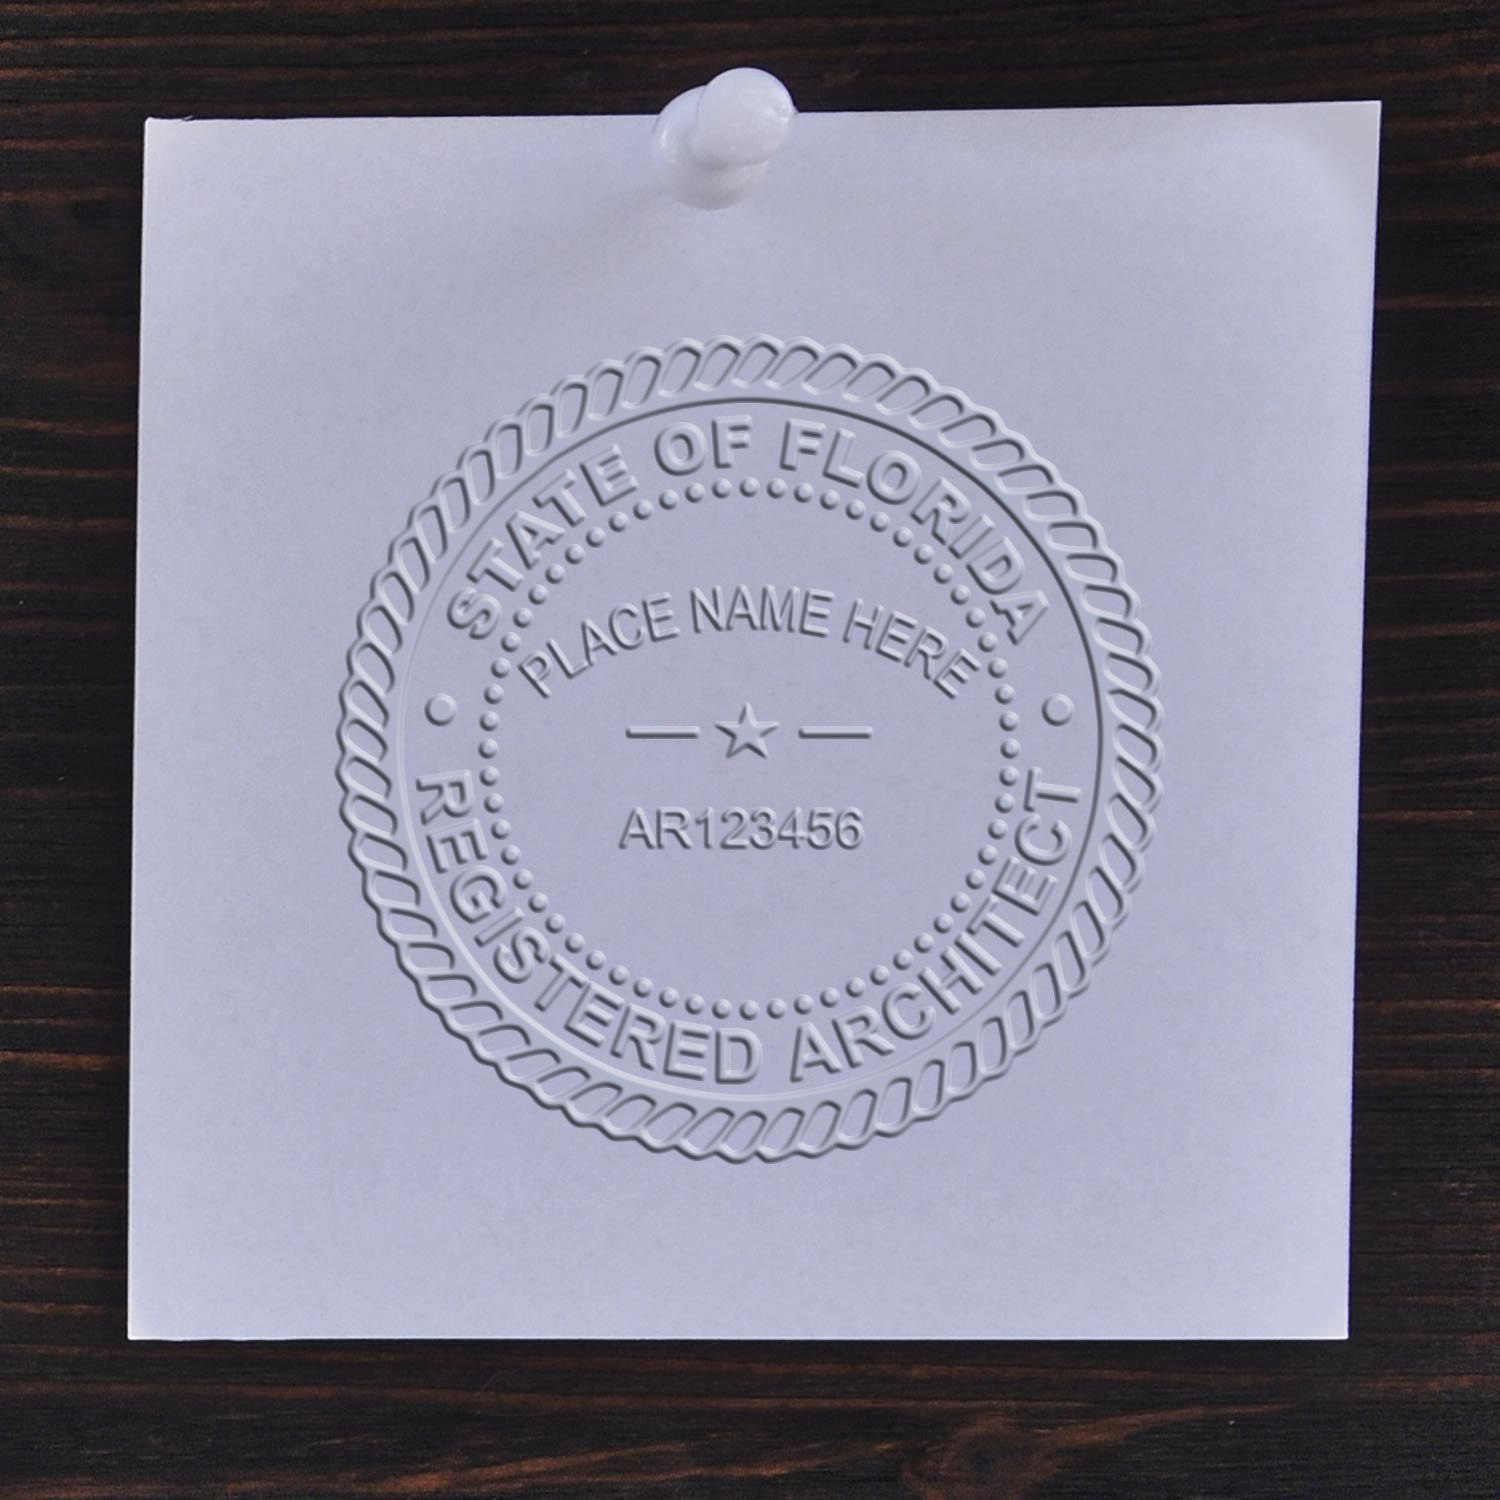 A stamped impression of the Florida Desk Architect Embossing Seal in this stylish lifestyle photo, setting the tone for a unique and personalized product.